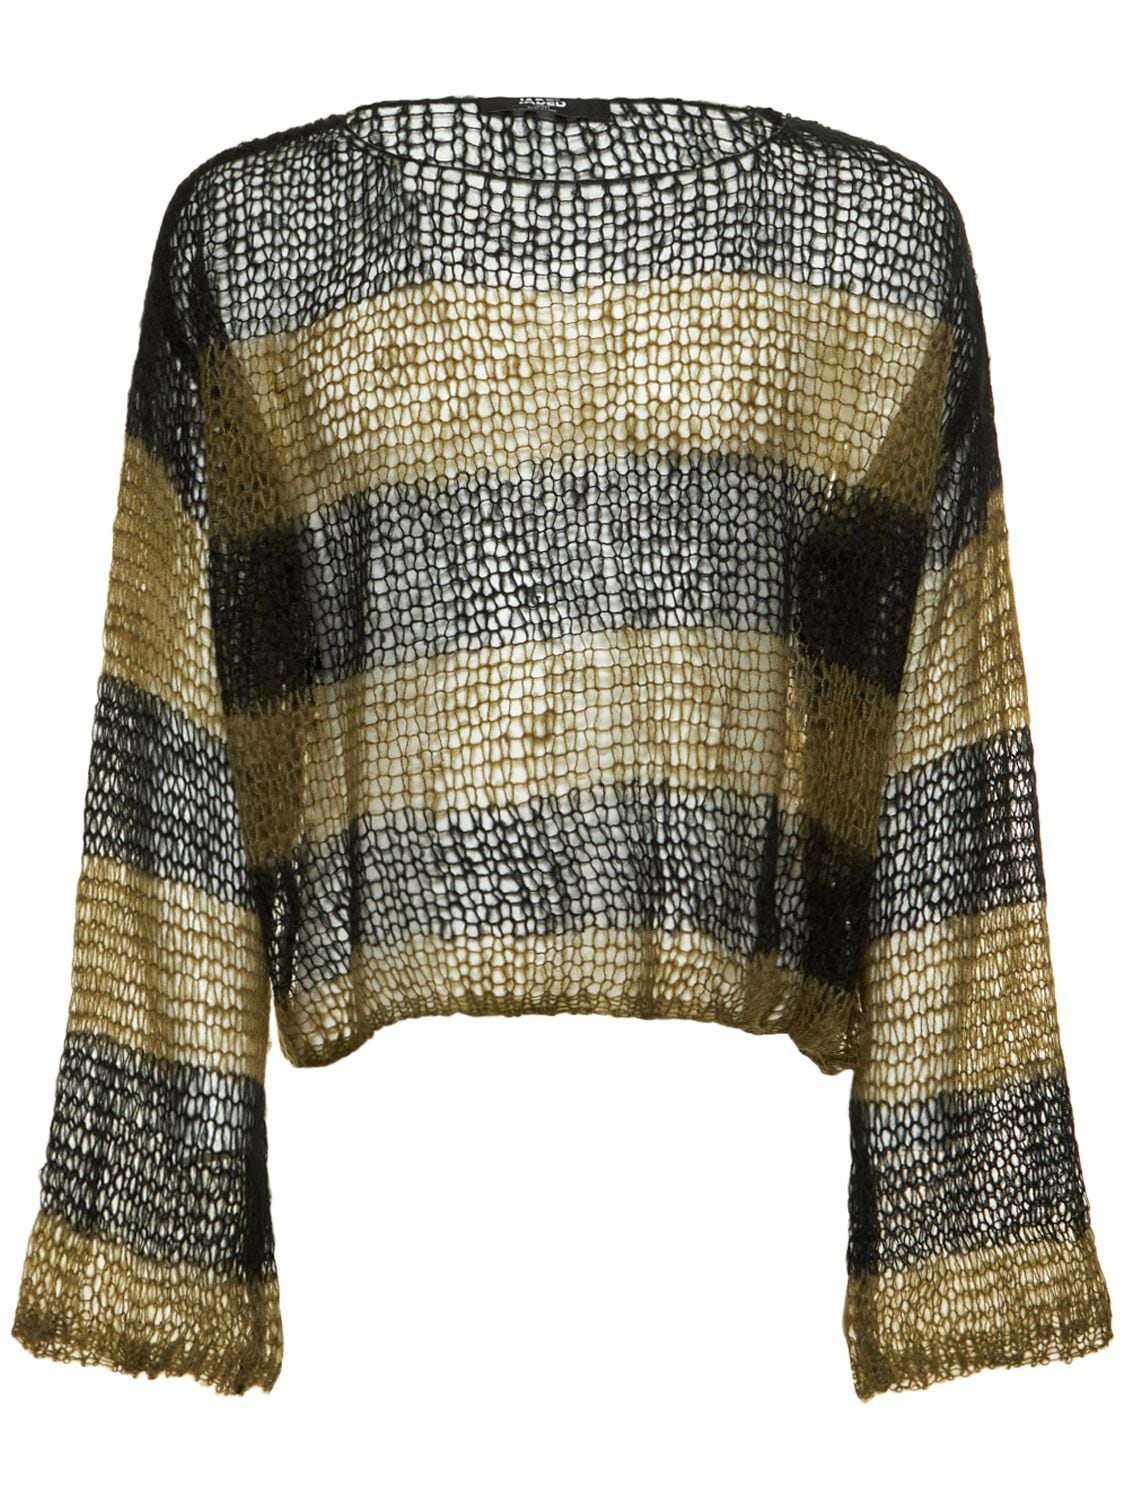 JADED LONDON Striped Knit See Through Sweater